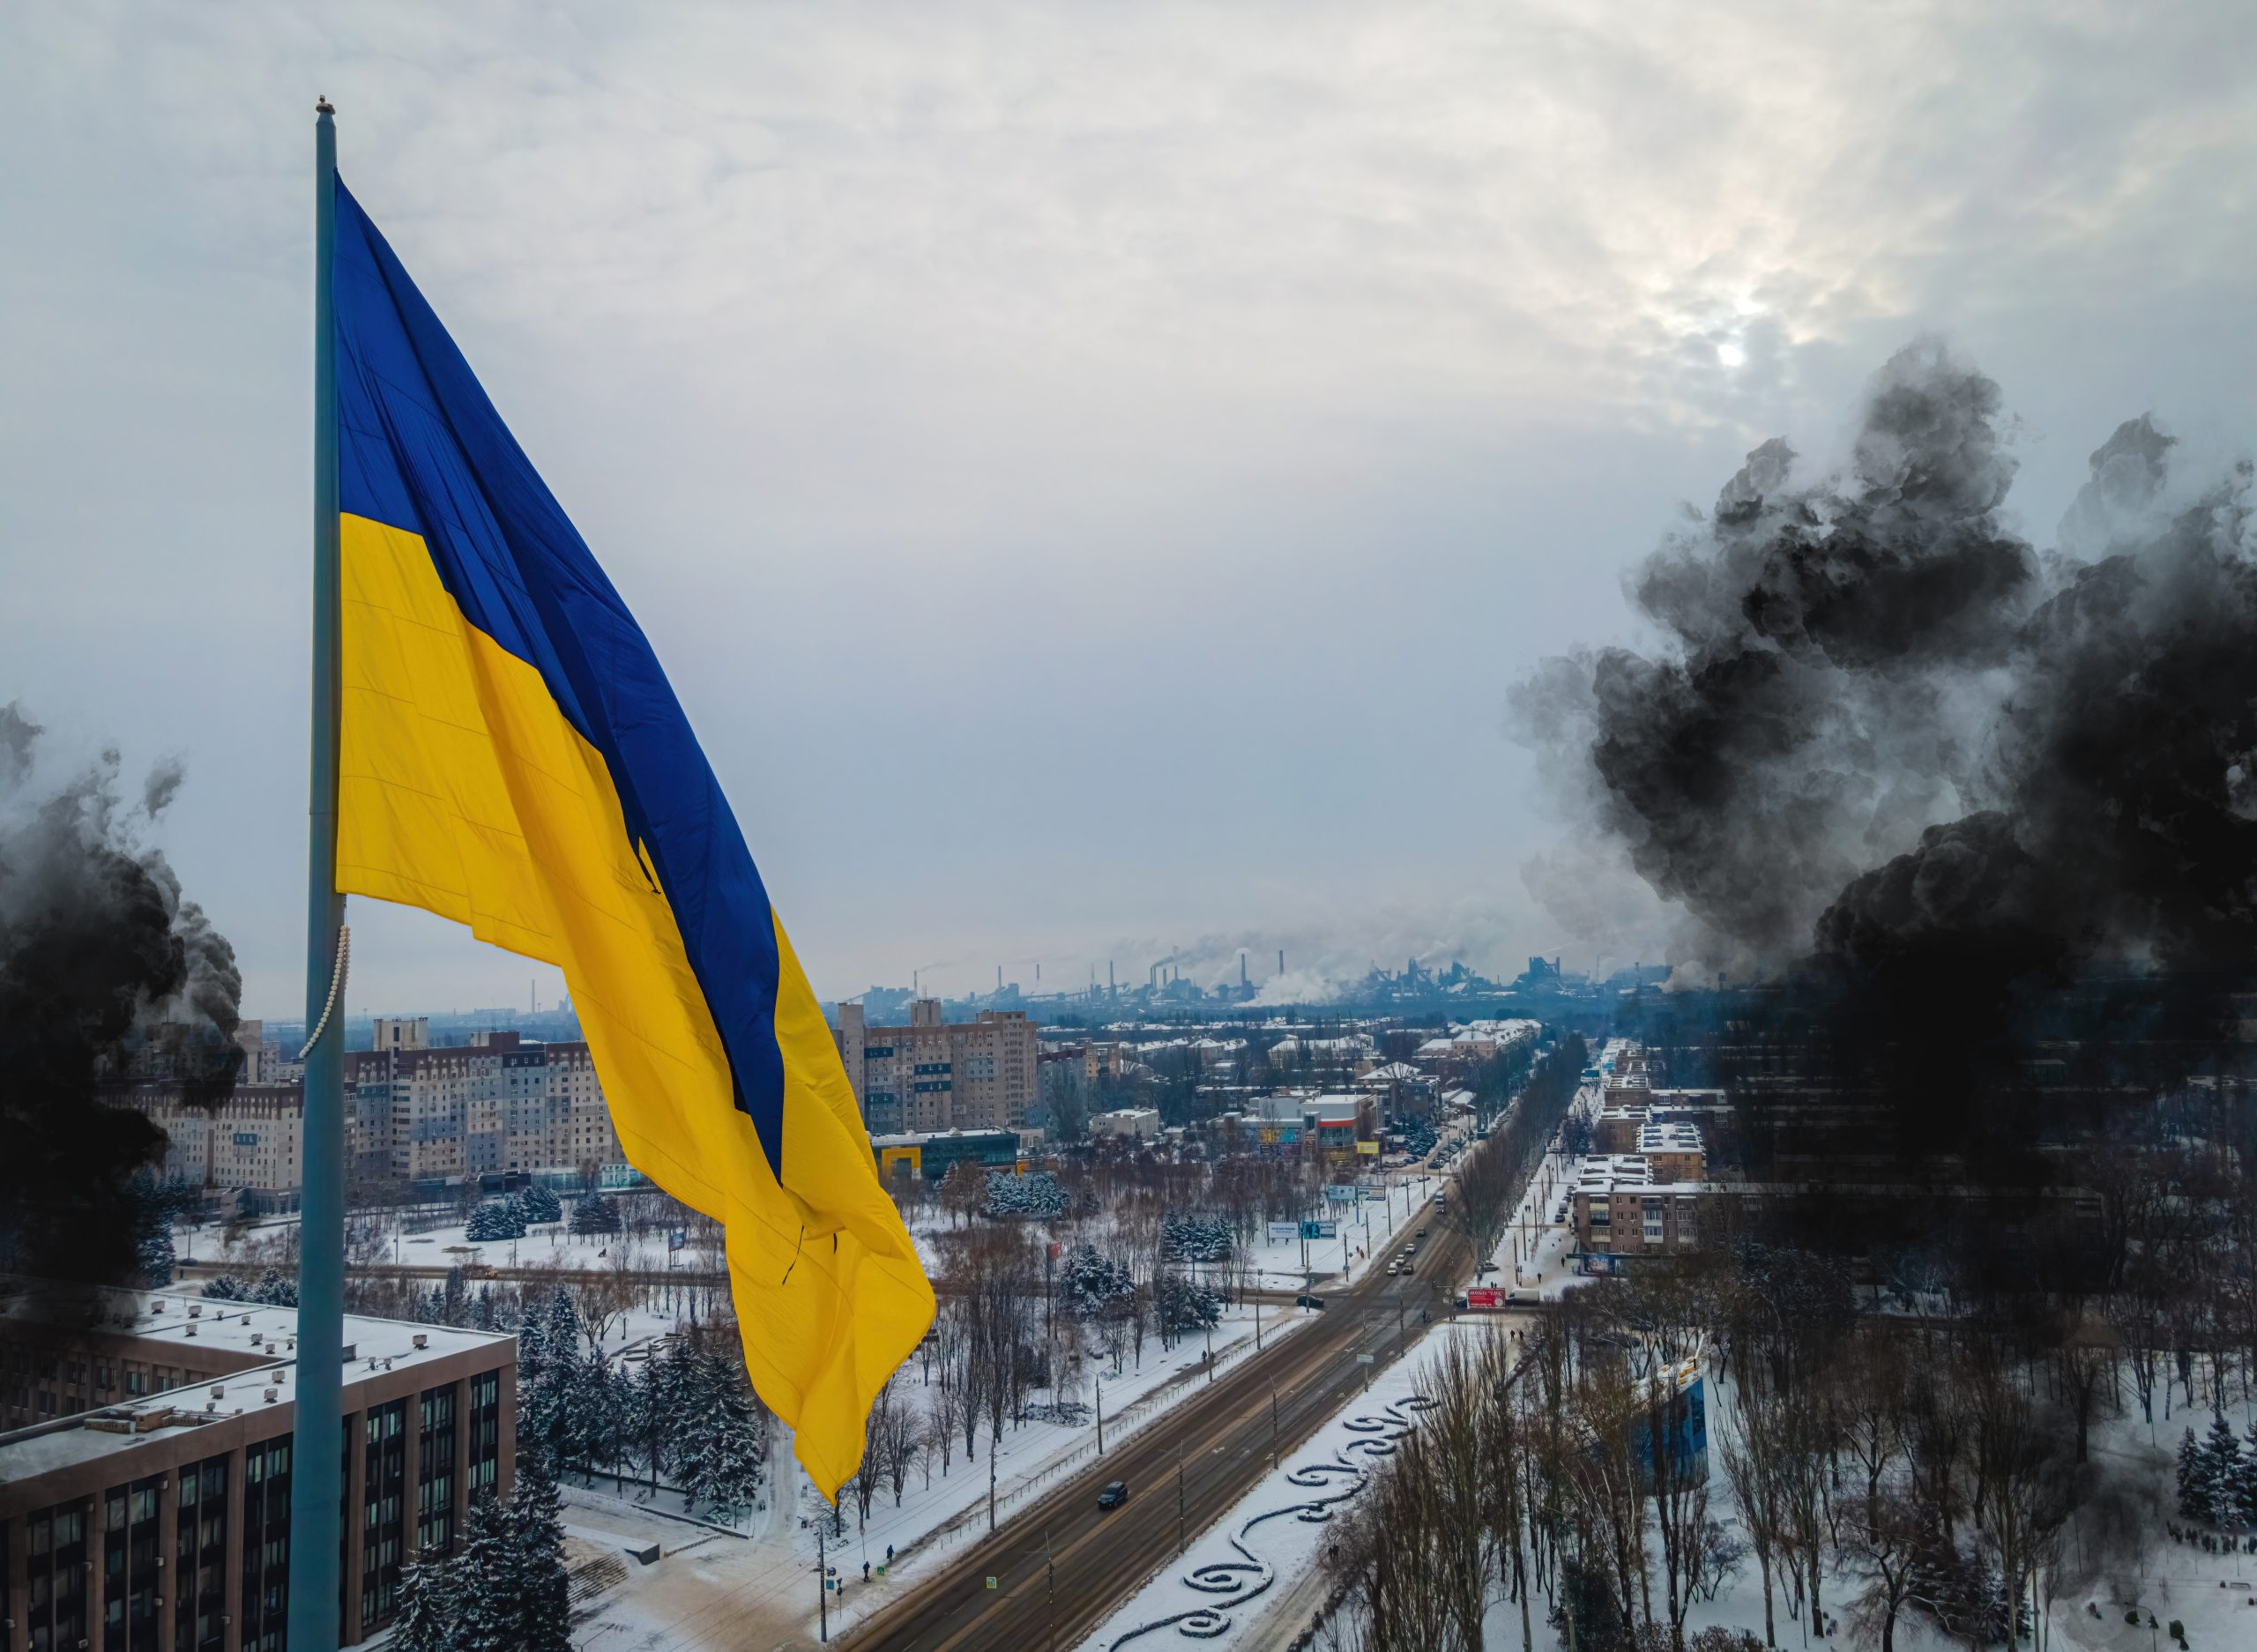 An image of the Ukrainian blue-and-yellow flag hanging over a city in Ukraine. Behind it is black smoke from an explosion and a cloudy sky.